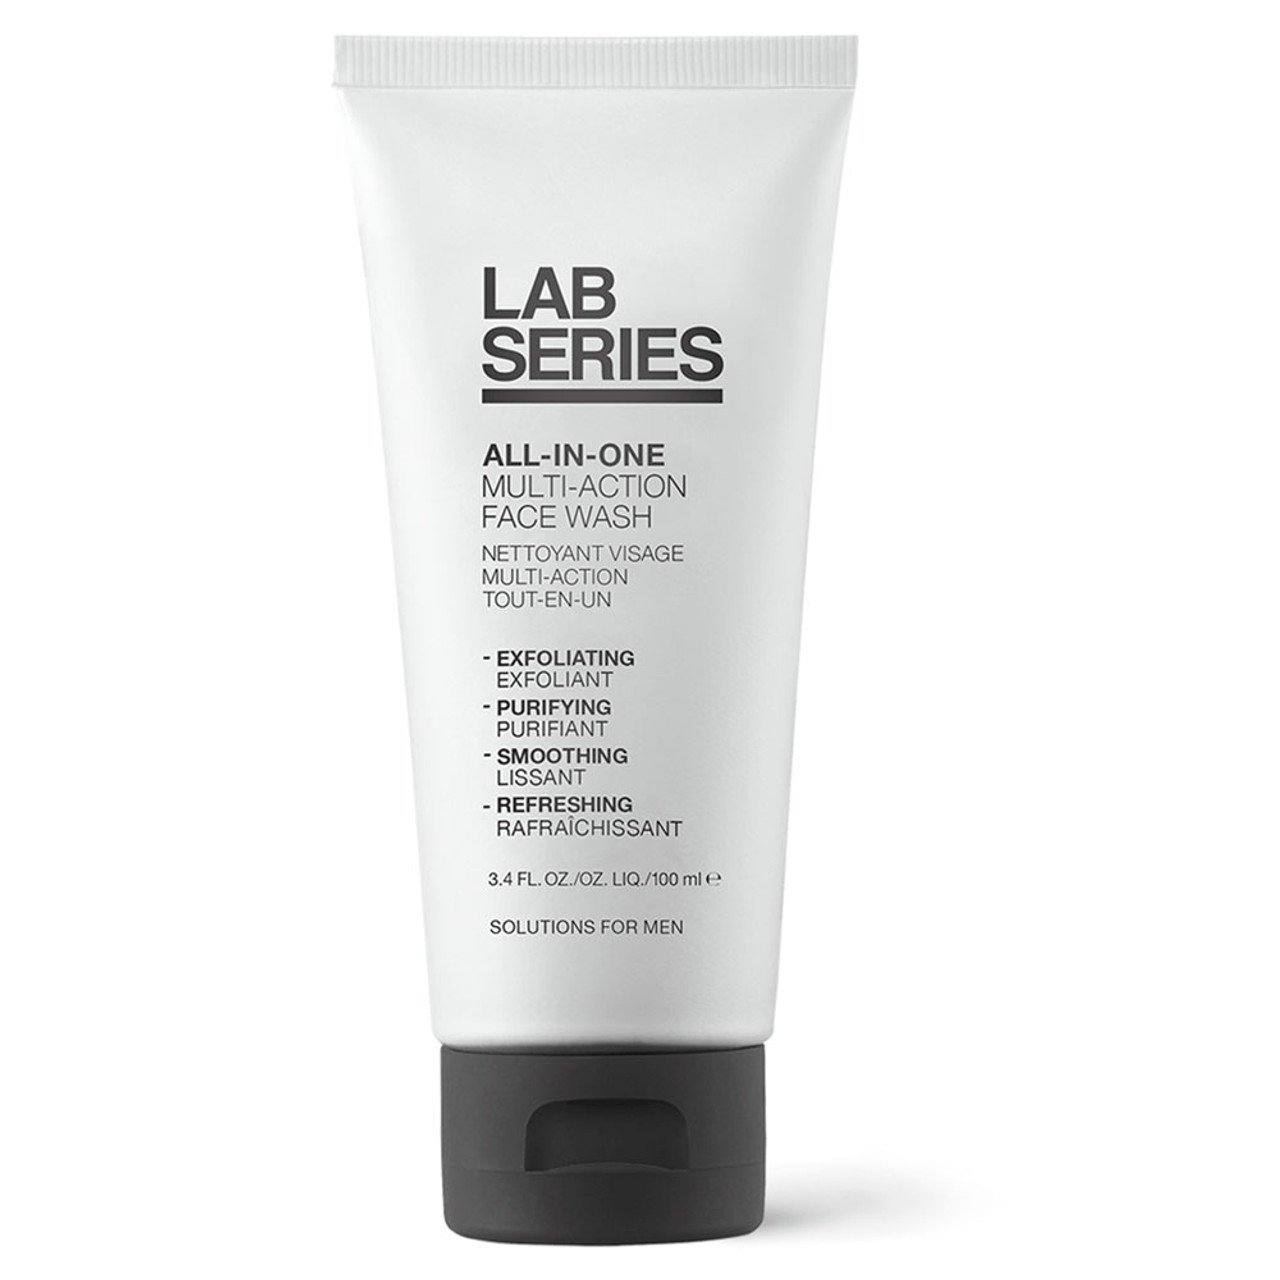 Lab Series All-In-One Multi-Action Face Wash BeautifiedYou.com